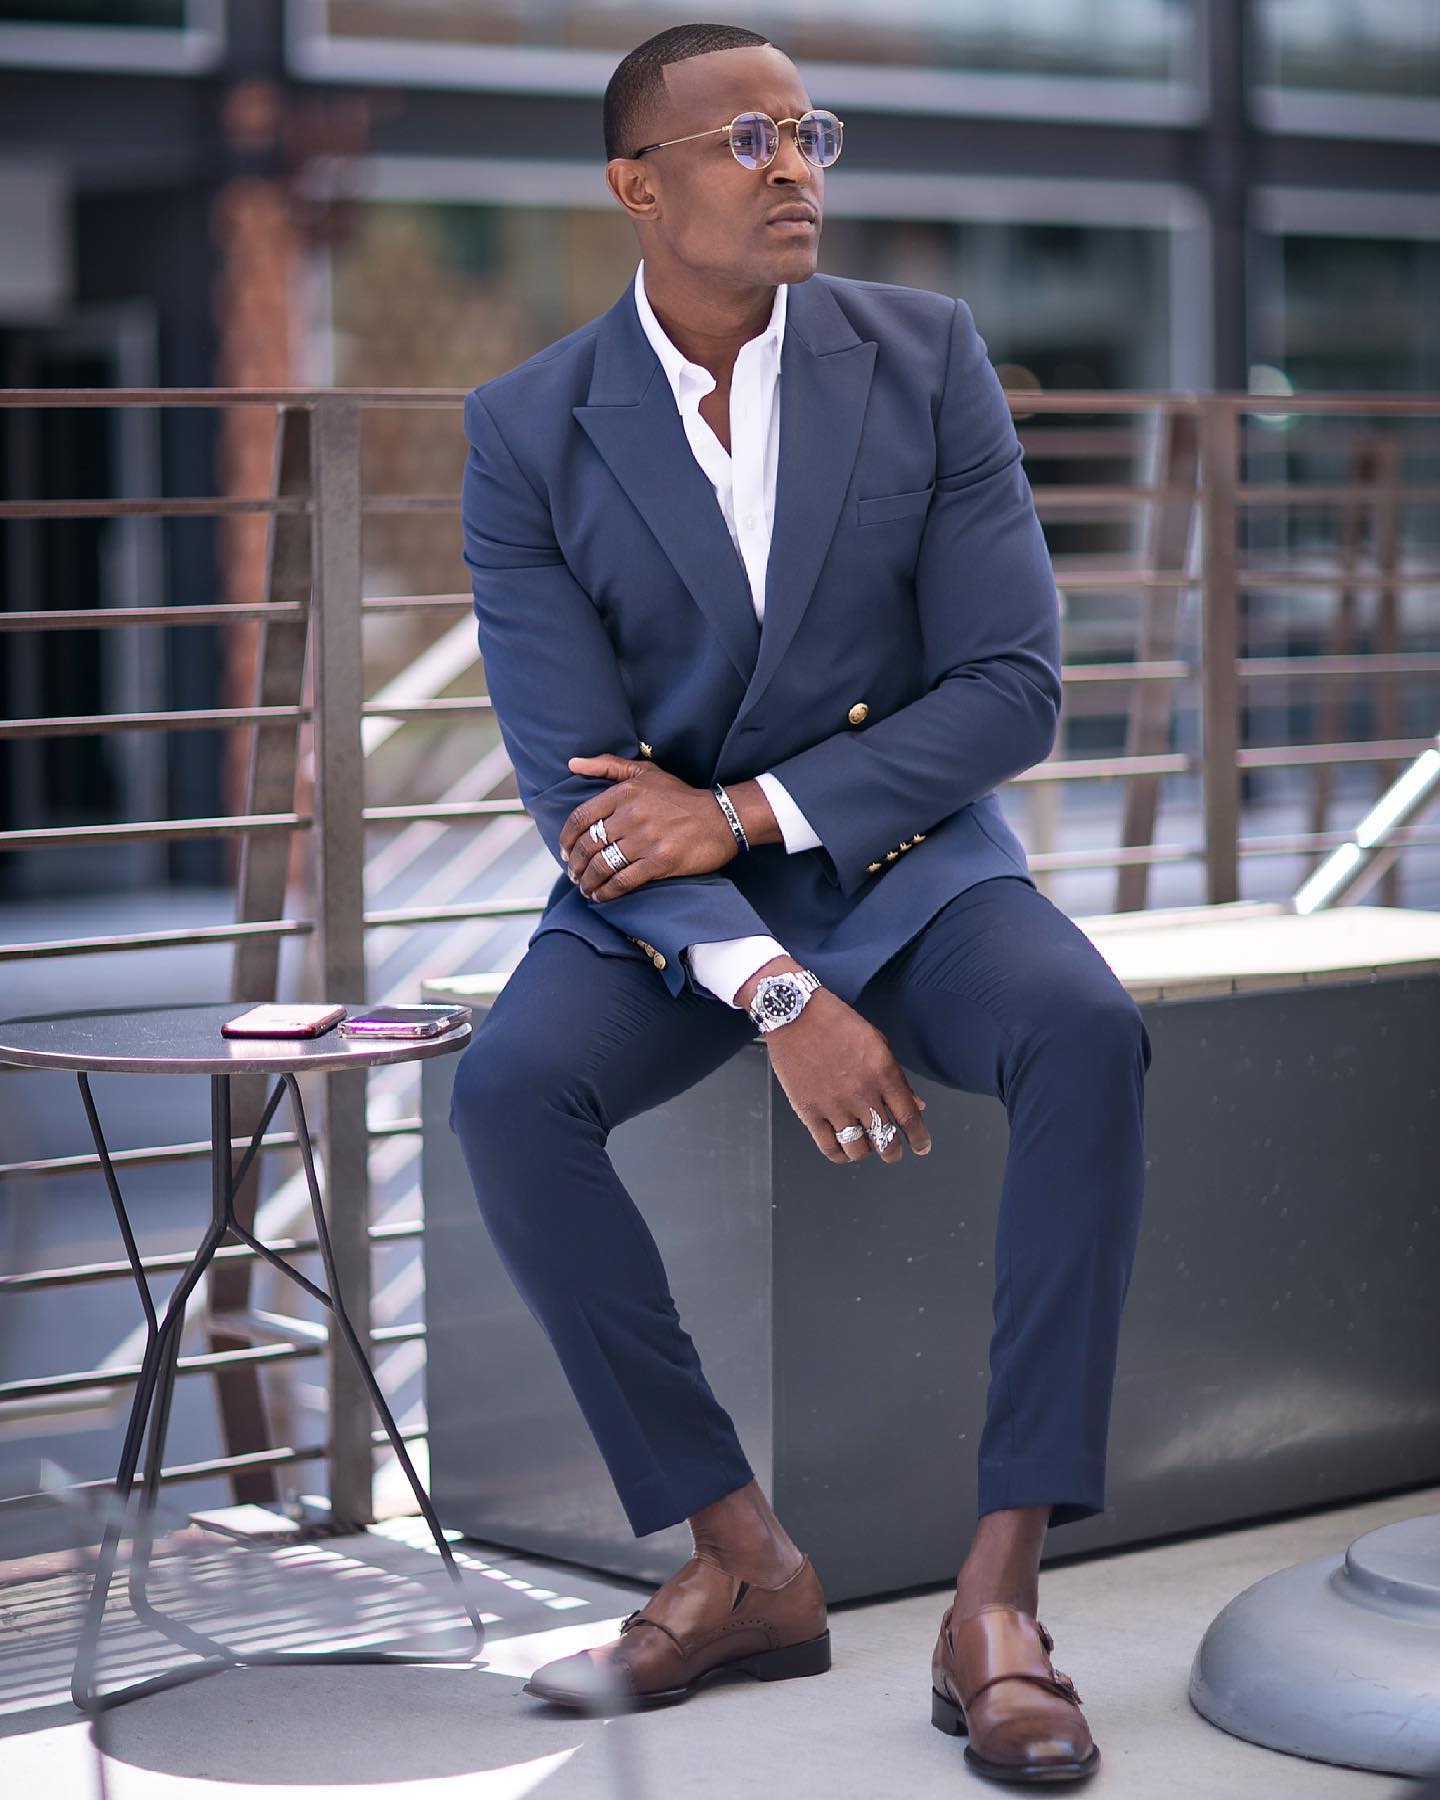 The 65 Best Office Outfit Inspirations for Men - Next Luxury